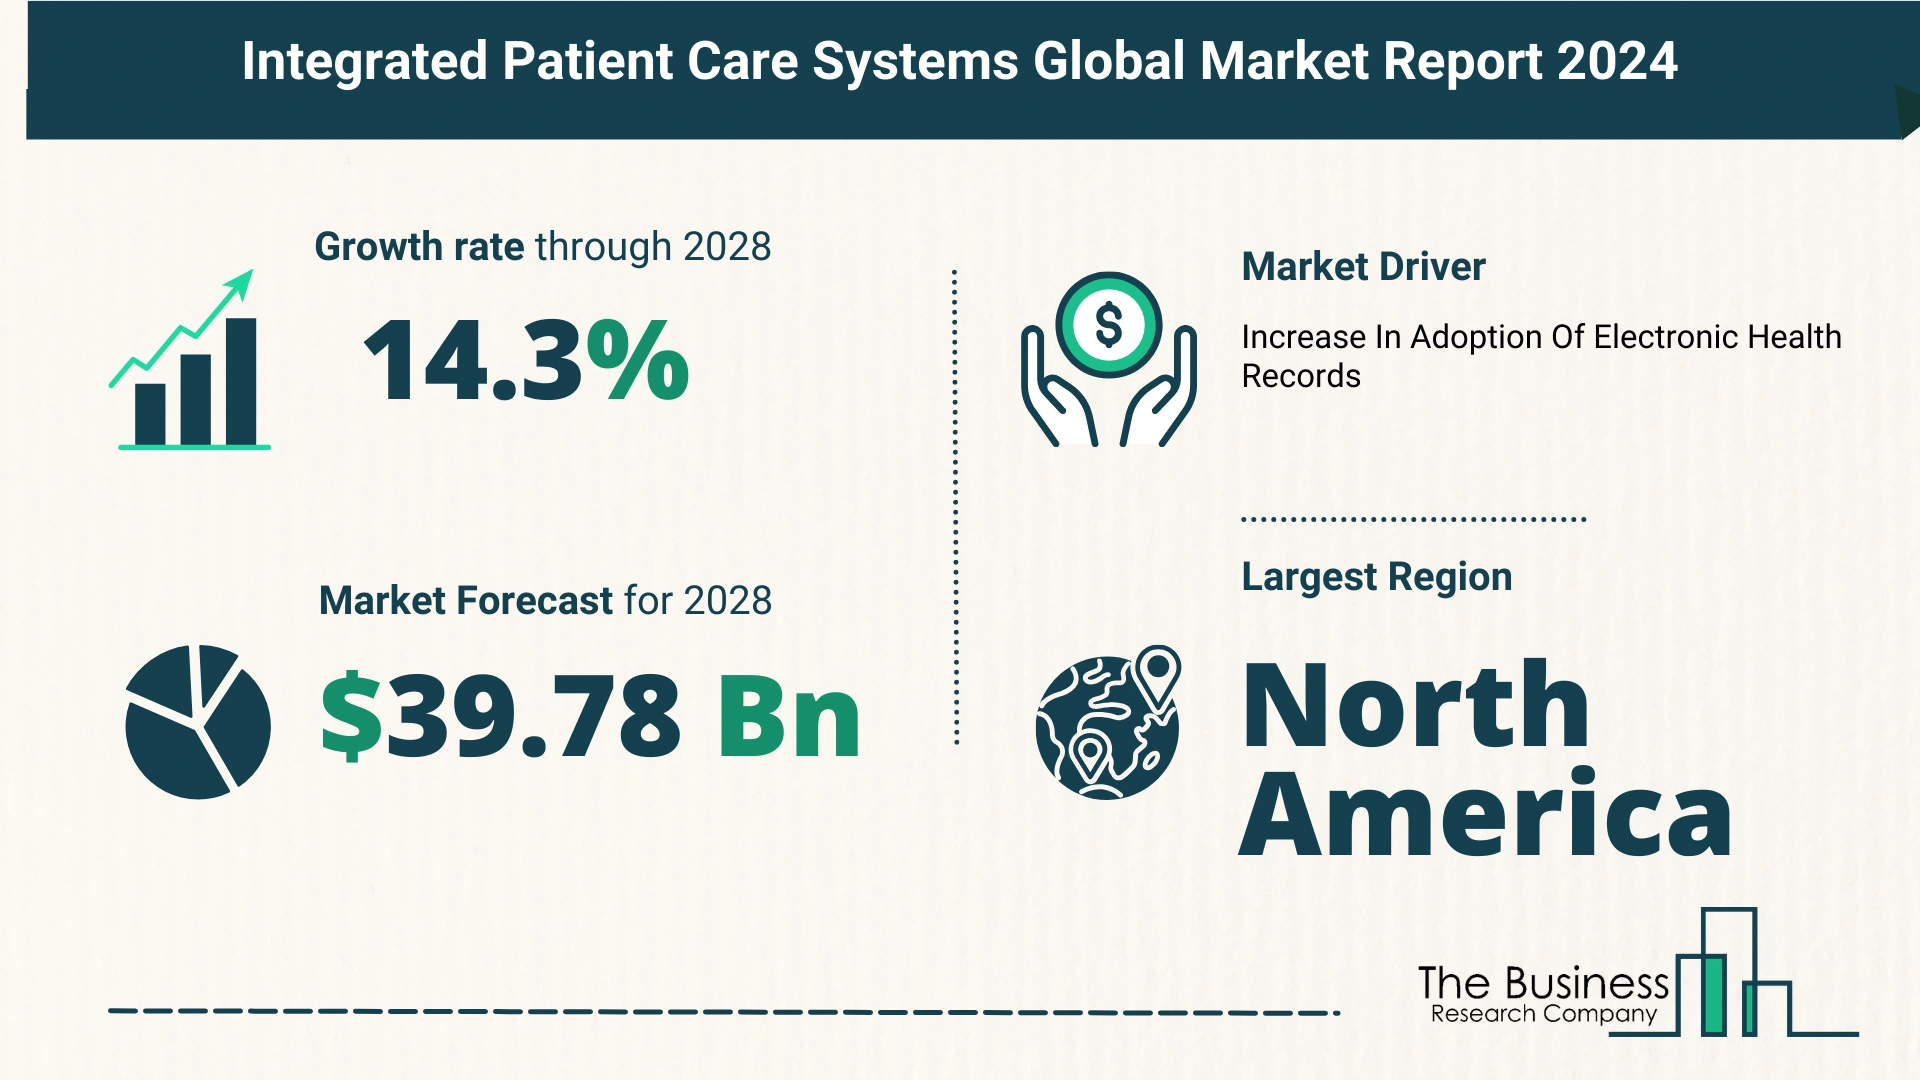 Top 5 Insights From The Integrated Patient Care System Market Report 2024